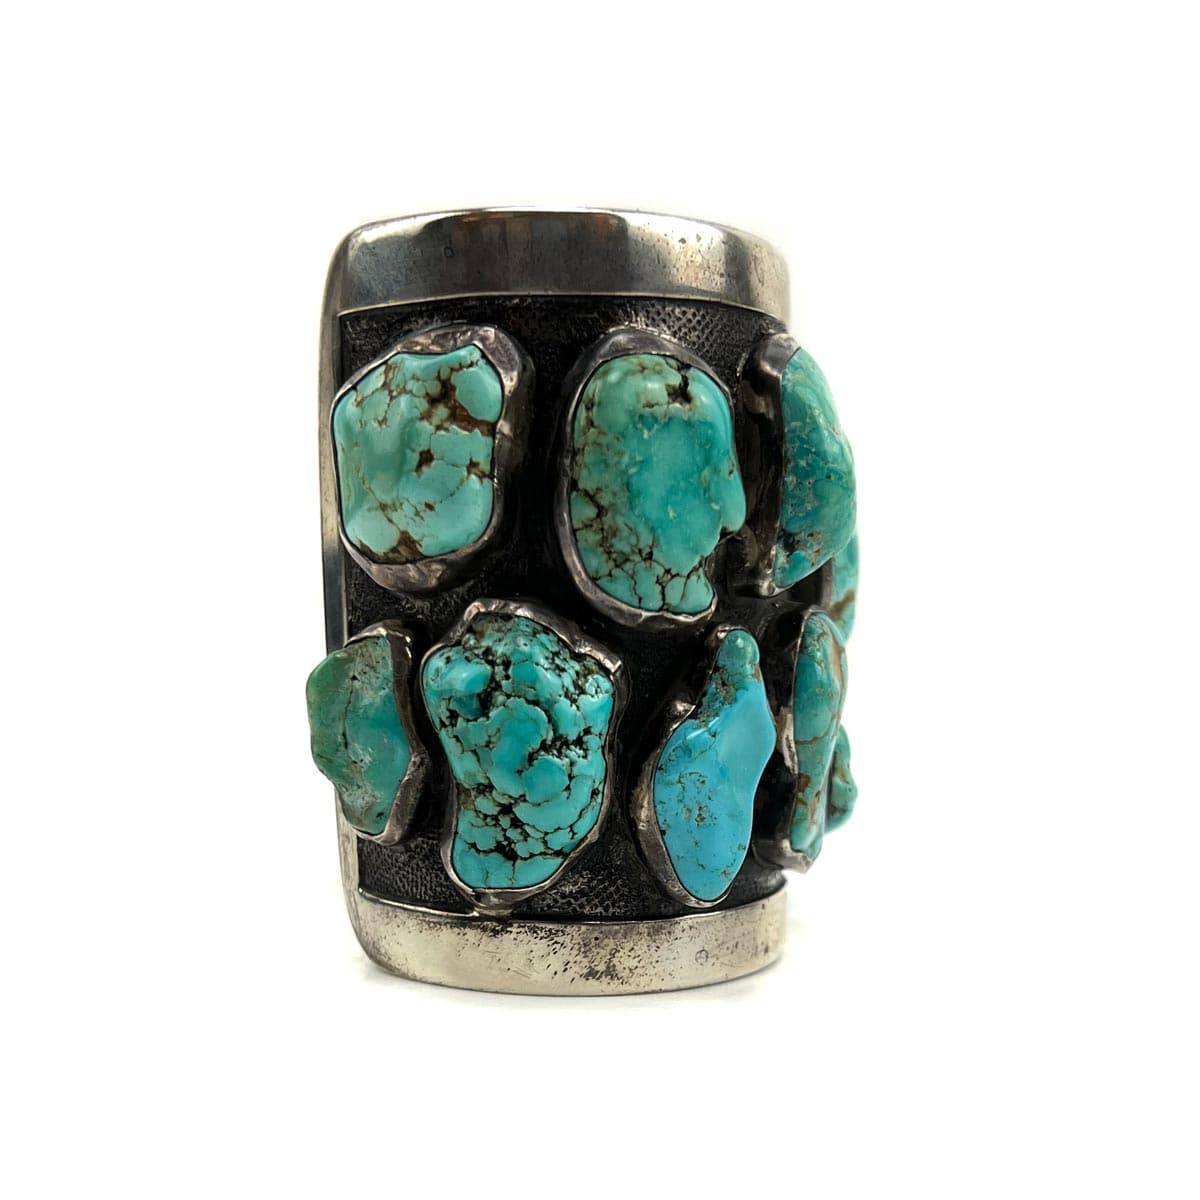 Patania Thunderbird Shop - Turquoise Nugget and Sterling Silver Bracelet c. 1950s, size 6.5 (J90370-0123-001)1
